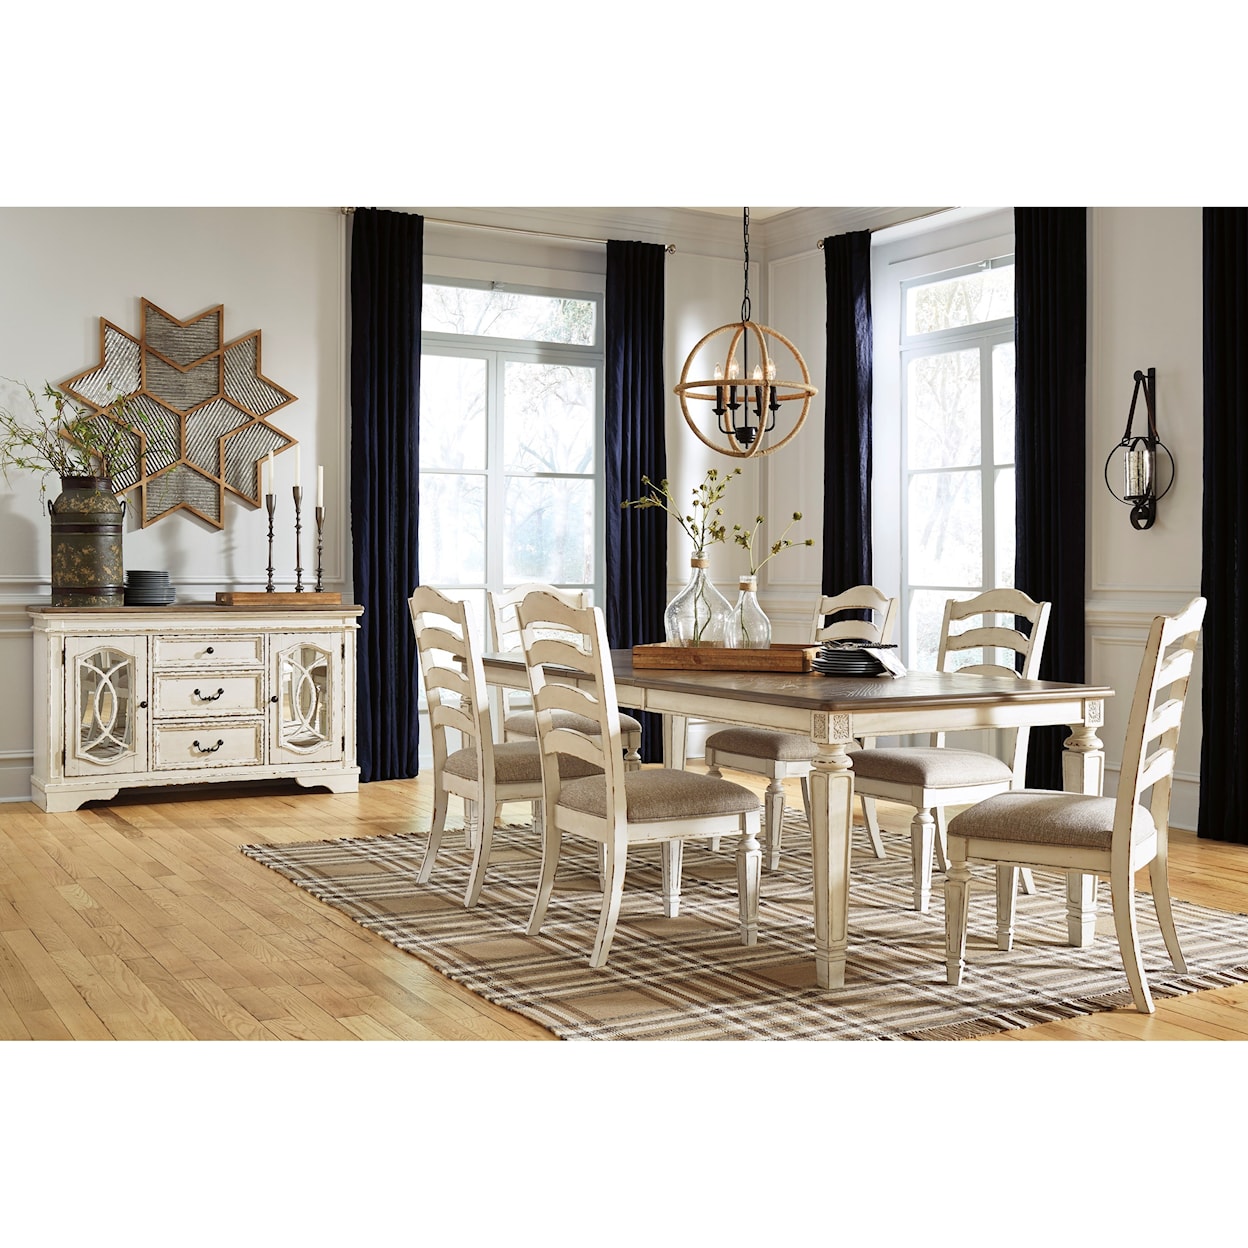 Ashley Furniture Signature Design Realyn Formal Dining Room Group